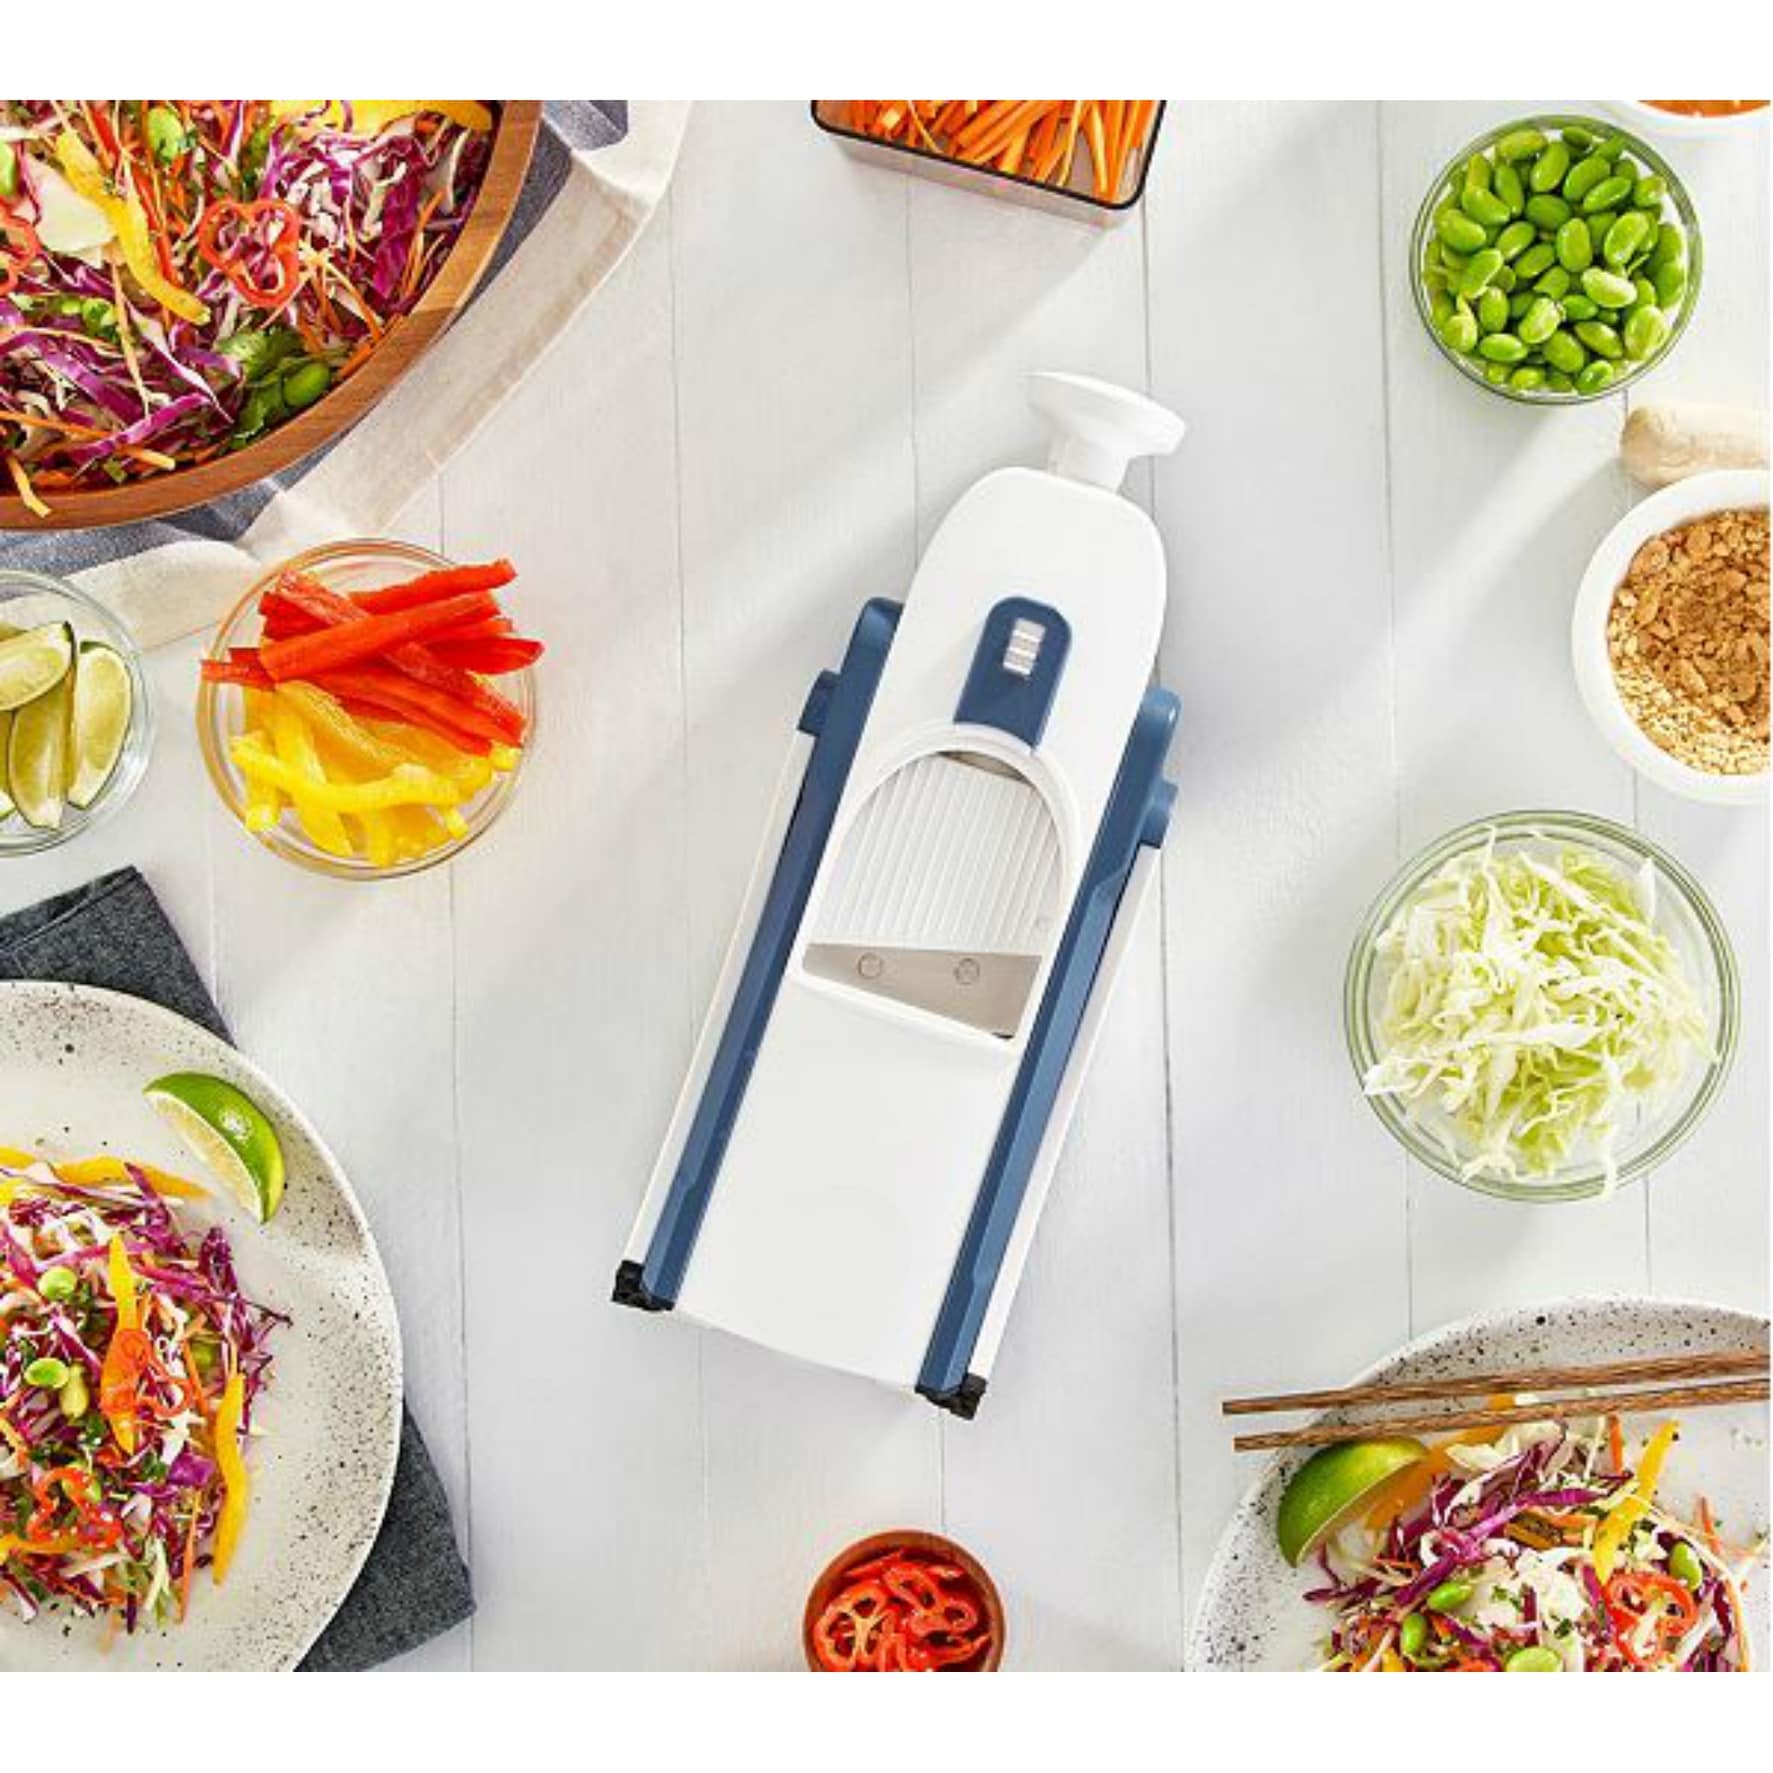 https://ak1.ostkcdn.com/images/products/is/images/direct/12b6e755848751fa5e43673233eaf936188ccb13/Foldable-Mandoline-Slicer-with-Adjustable-Thickness.jpg